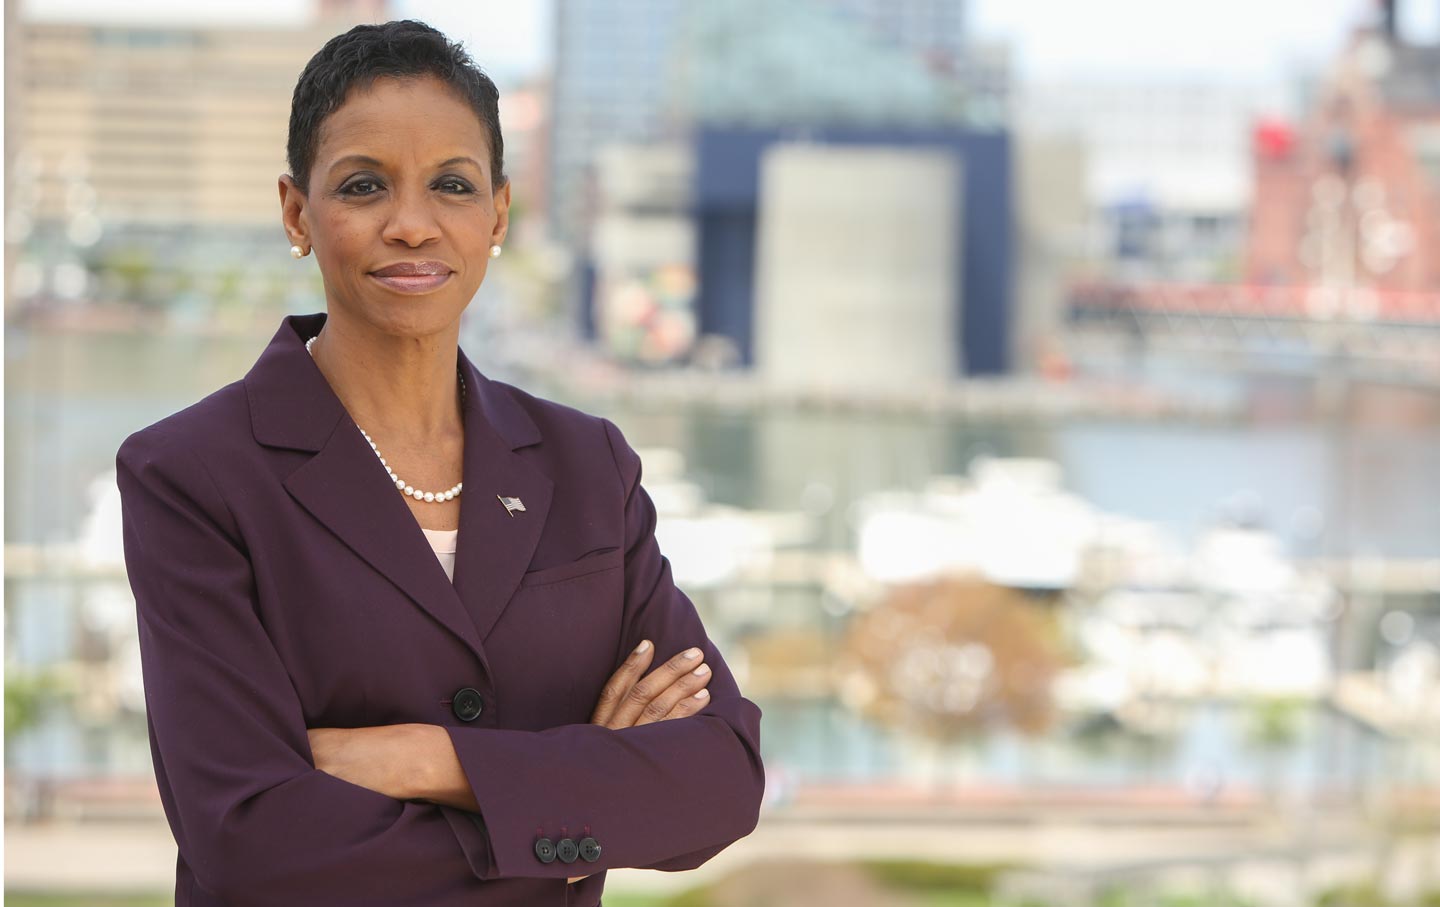 We’ve Had 1 Black Woman Senator in 227 Years. Donna Edwards Is Running to Change That.